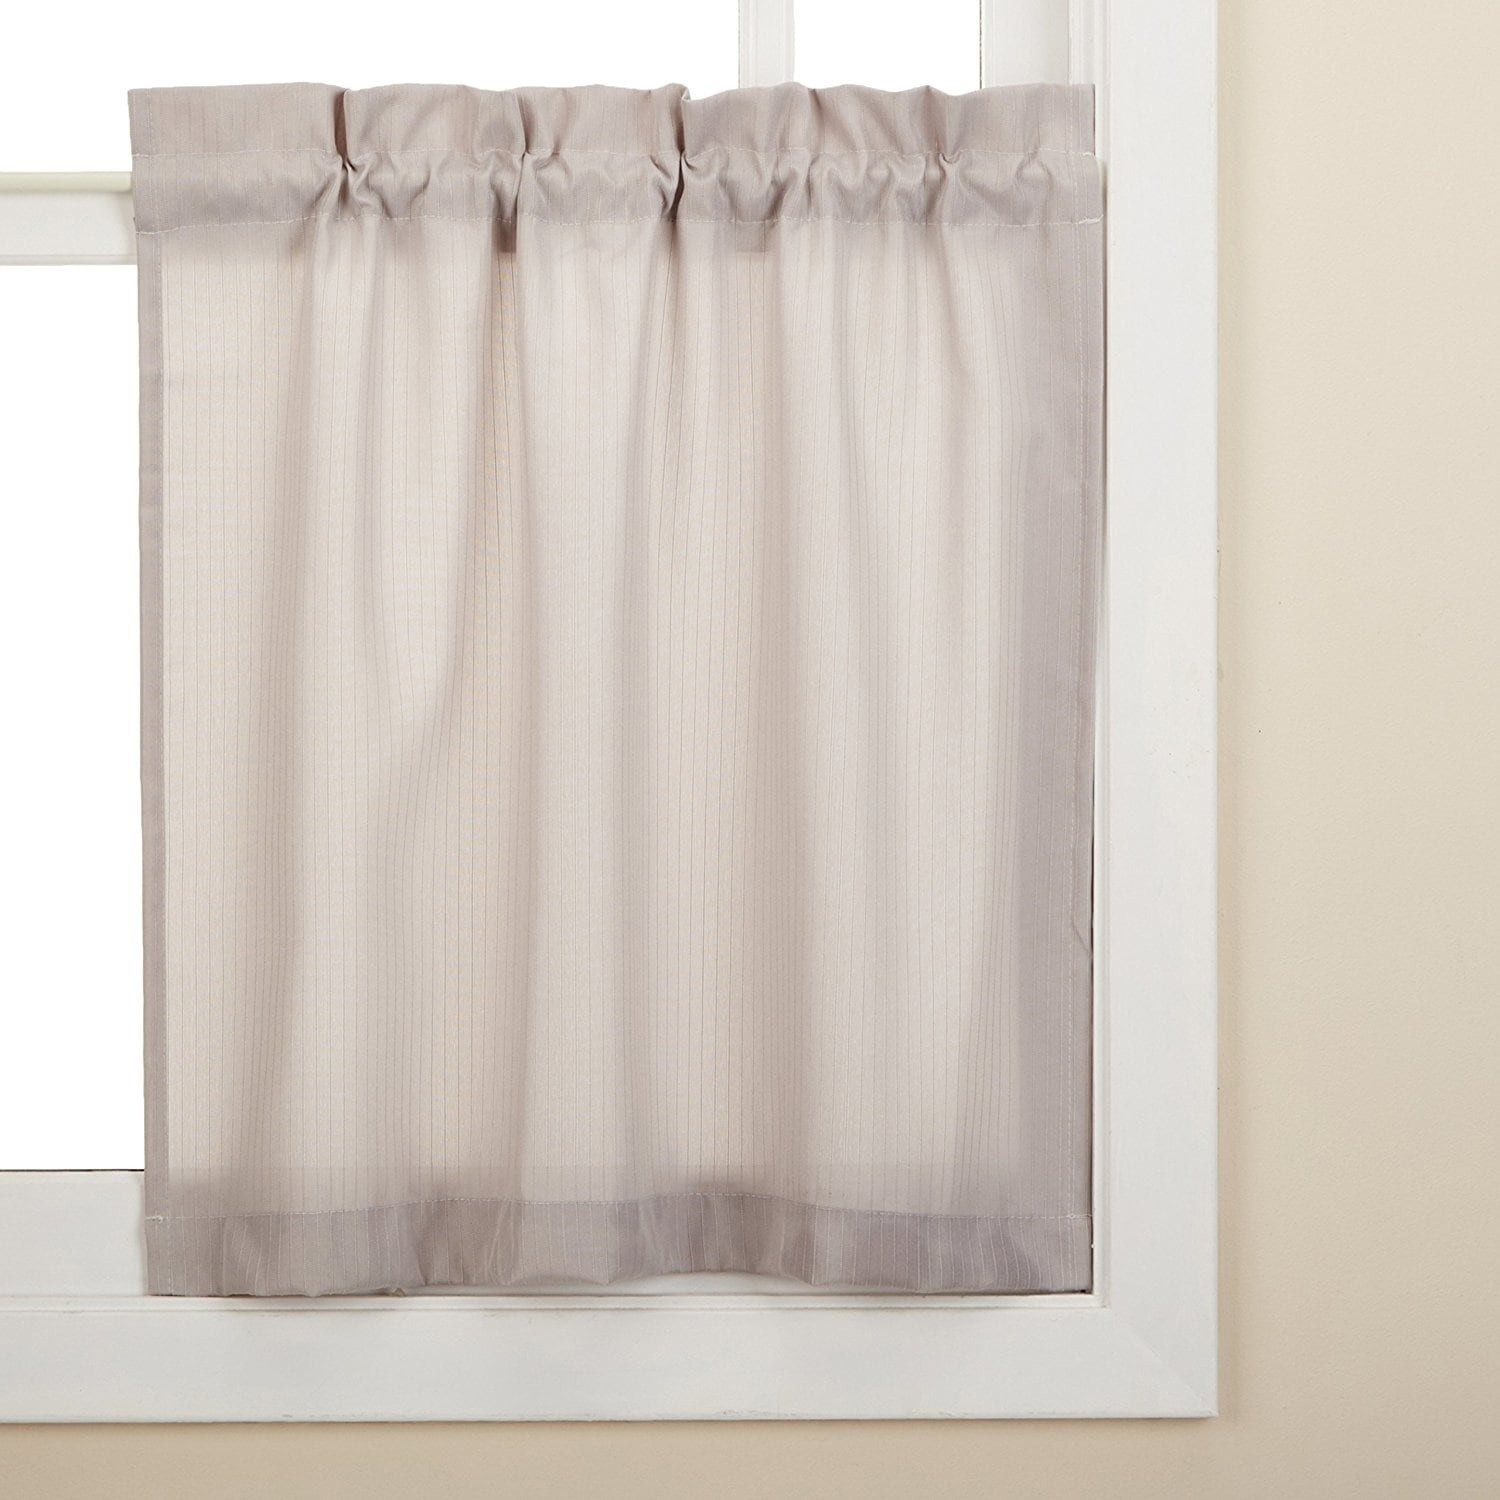 Walmart Kitchen Curtains Valances
 Sweet Home Collection Opaque Grey Ribcord Kitchen Curtain